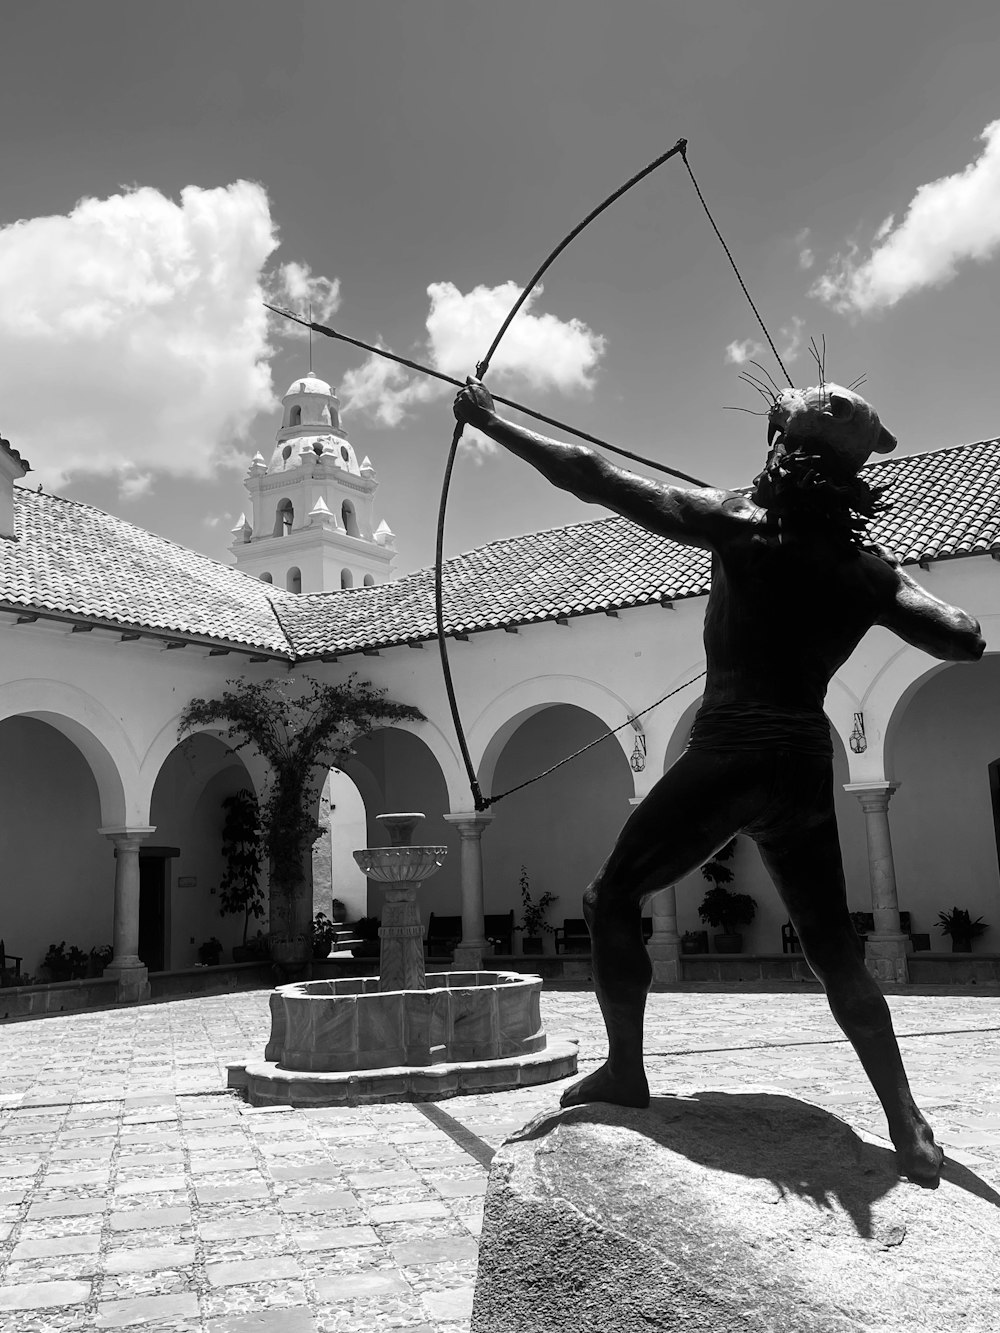 a statue of a person holding a bow and arrow